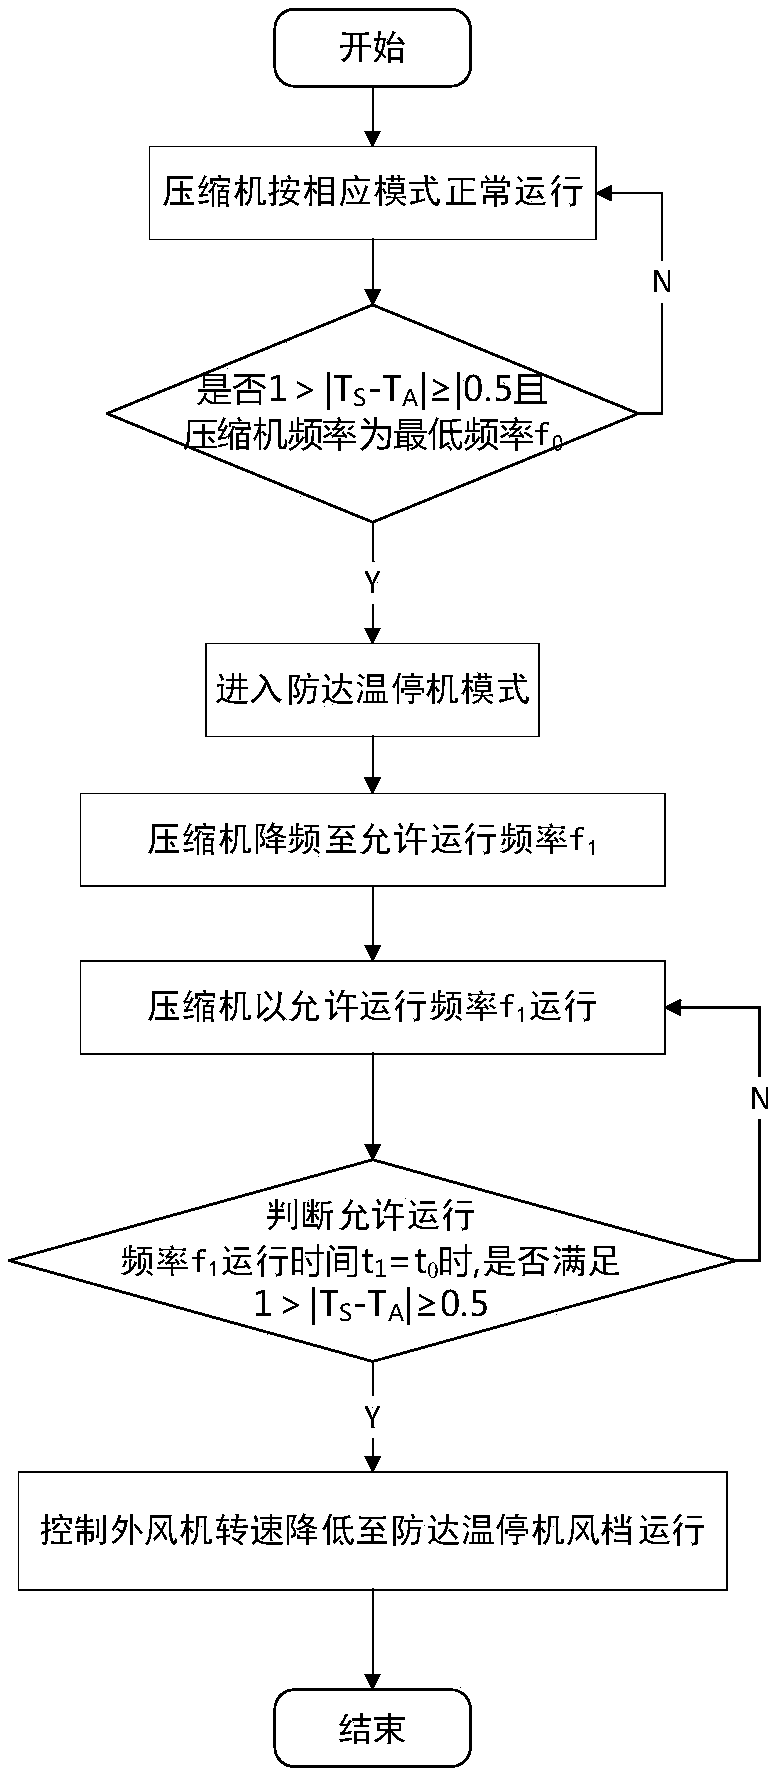 Control method for preventing temperature-reaching halting of variable-frequency air conditioner